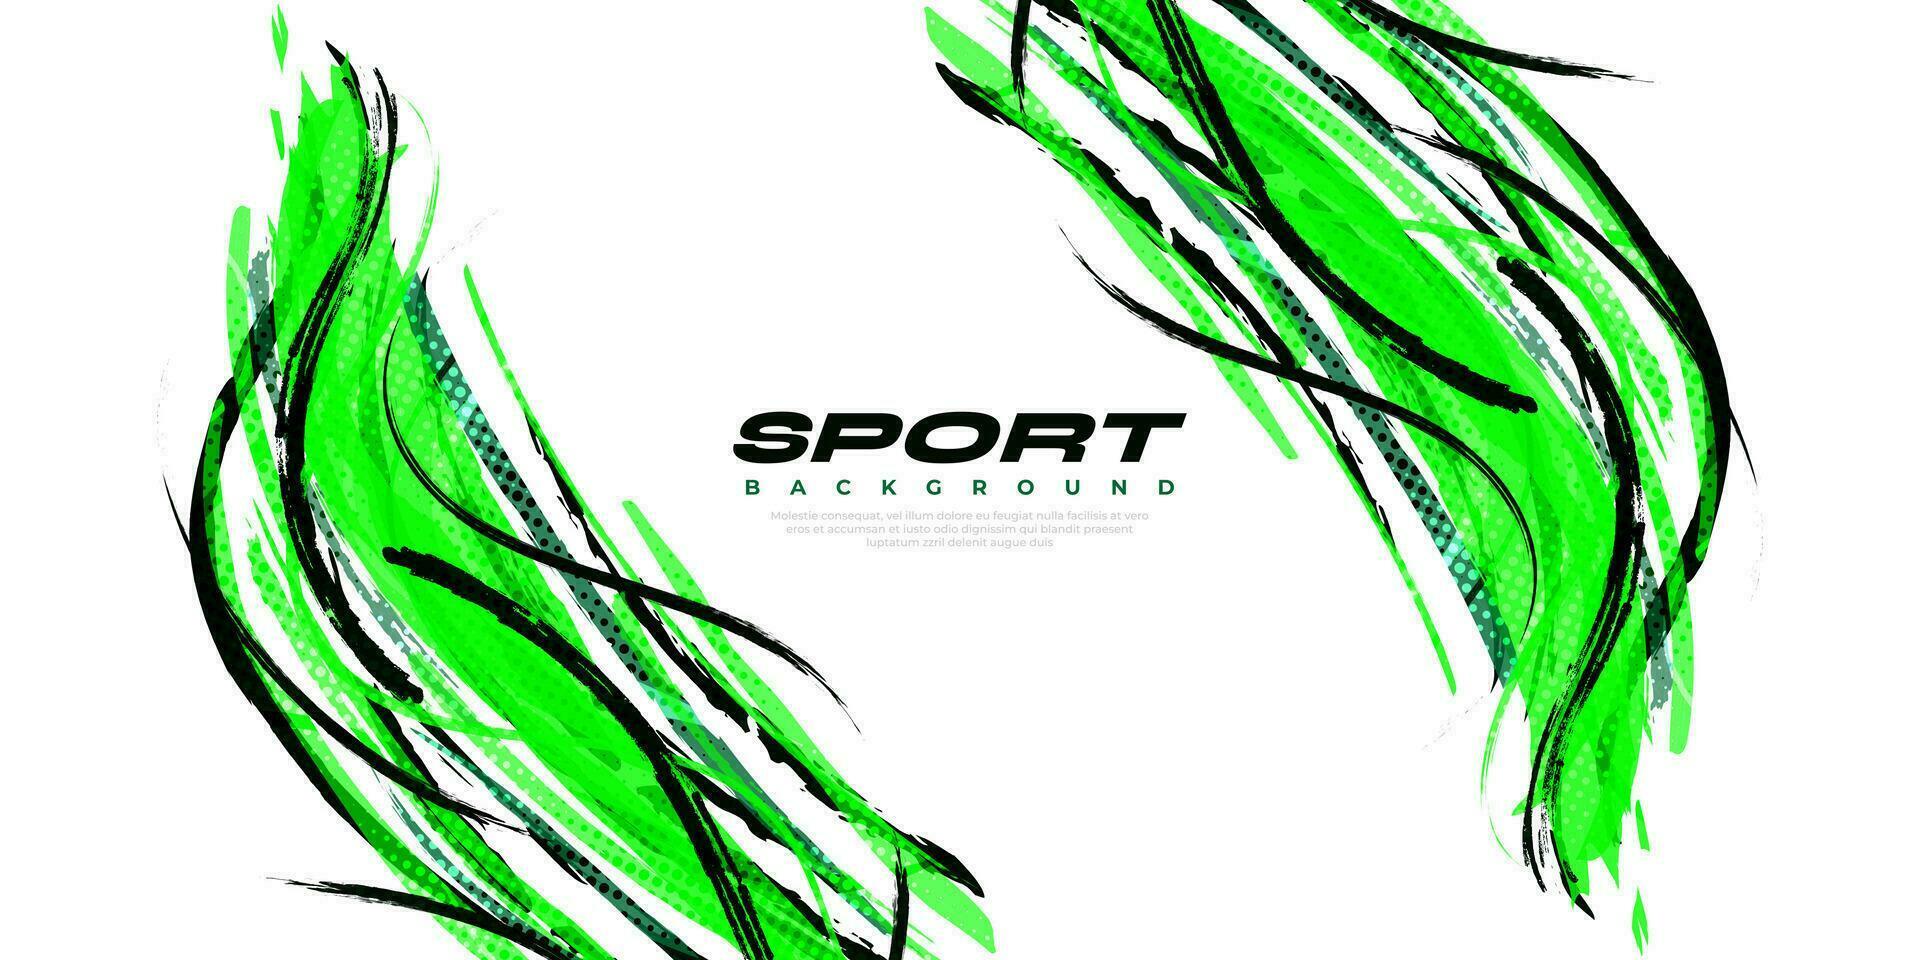 Abstract Black and Green Brush Background with Sporty Style and Halftone Effect. Brush Stroke Illustration for Banner, Poster, or Sports Background vector